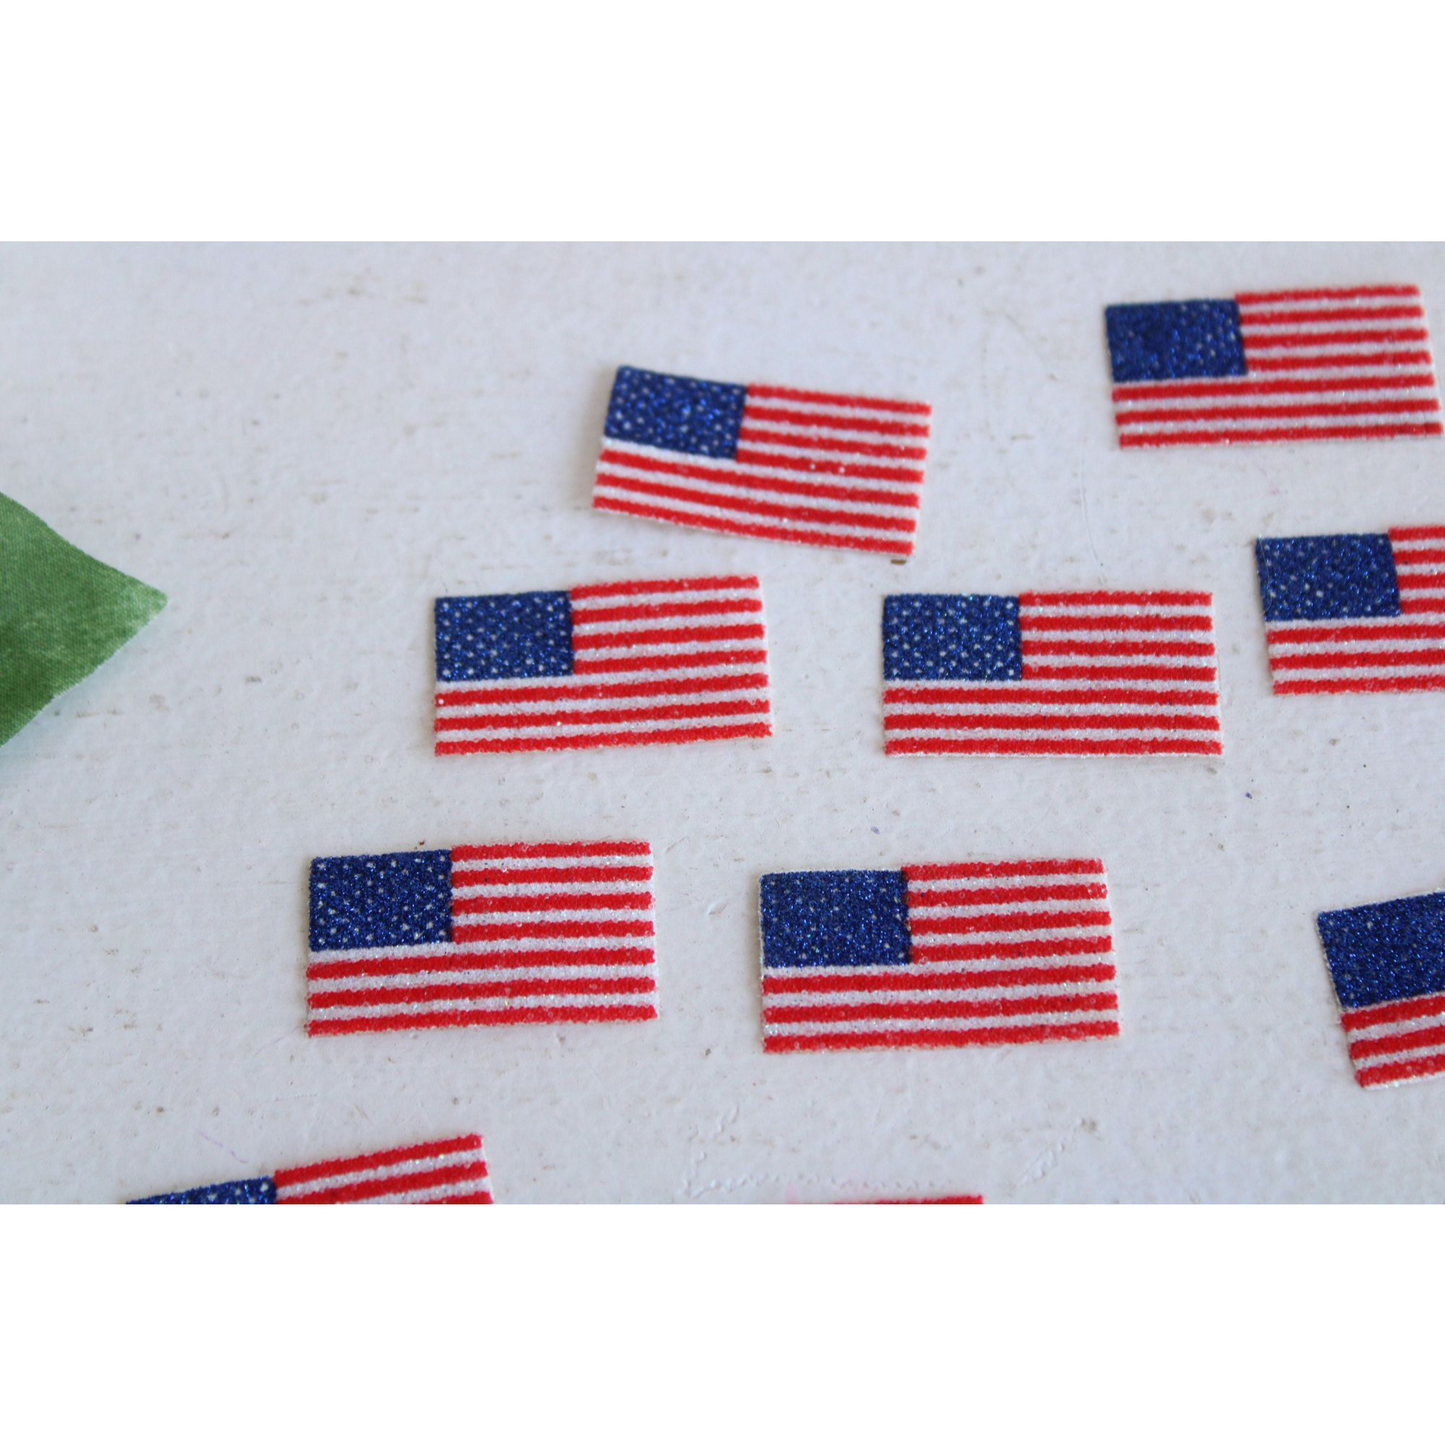 Vintage Flag Patches / American Flag Iron On 1.25" Wide / Dollmaking Sewing Crafting Altered Art